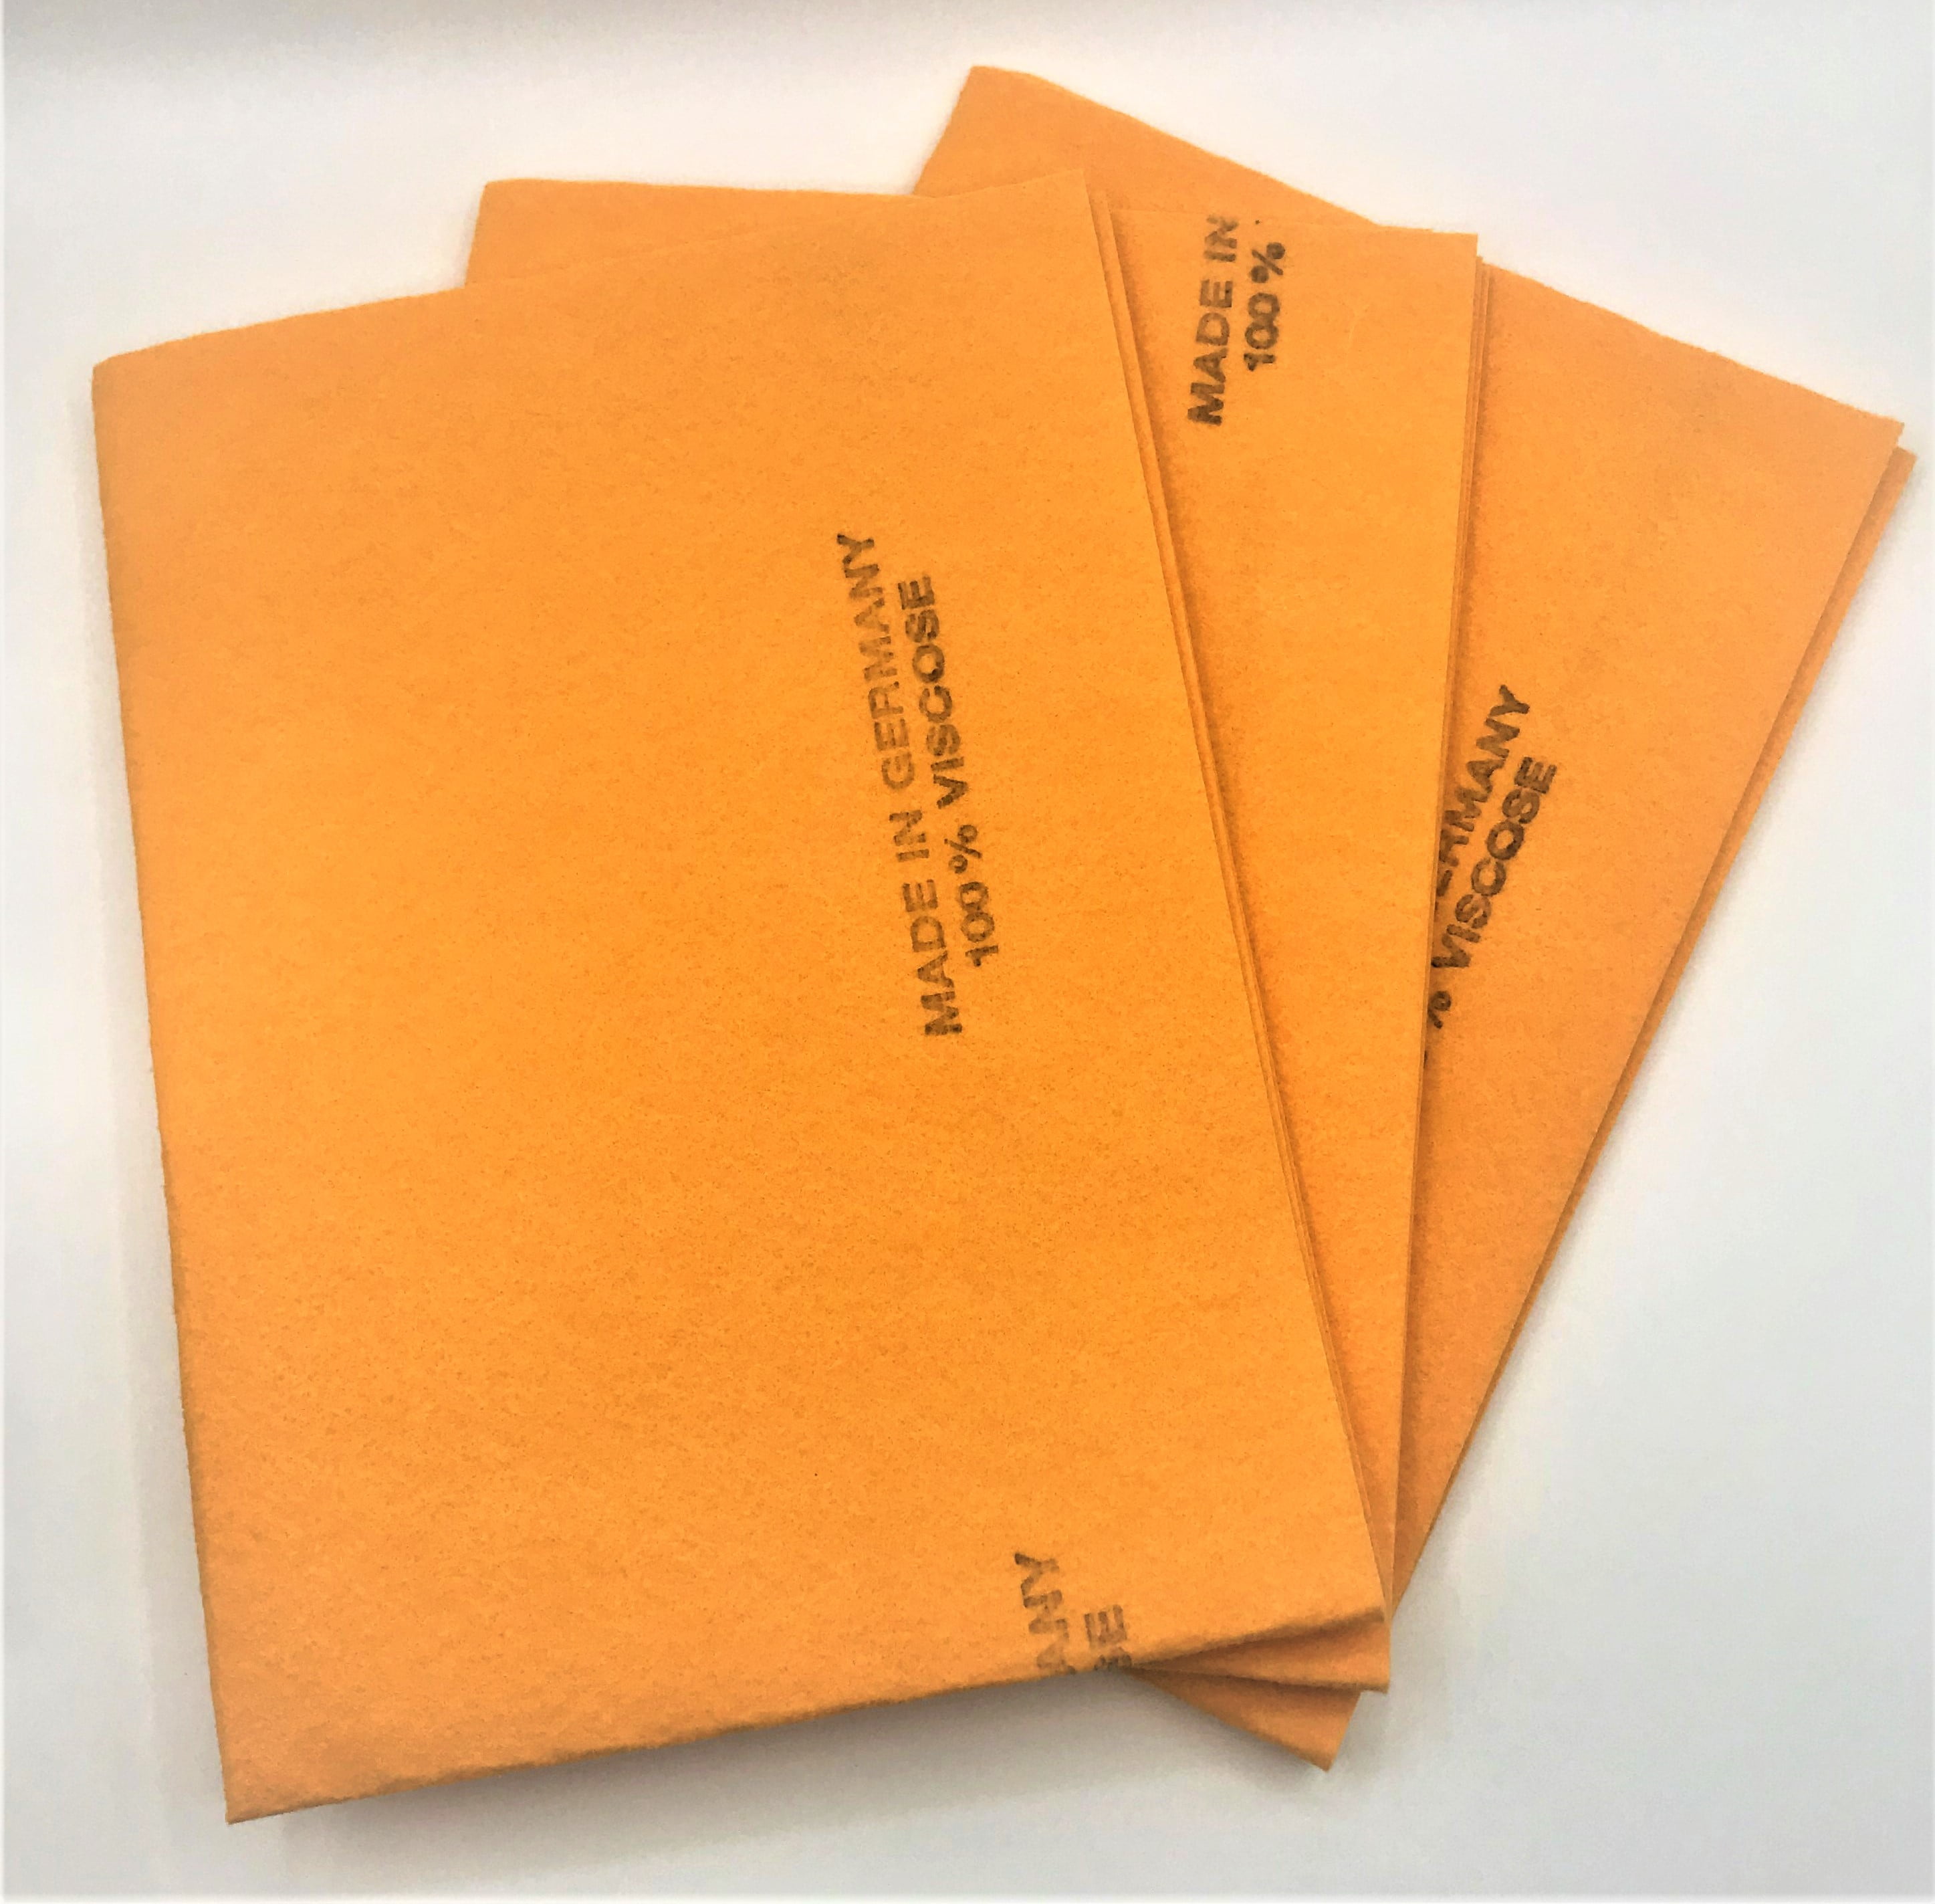 Kitchen Home Super Chamois - Extra Large 20 x 27 Super Absorbent Cleaning Cloth - 6 Pack Orange Shammy - Holds 20X It's Weight in Liquid